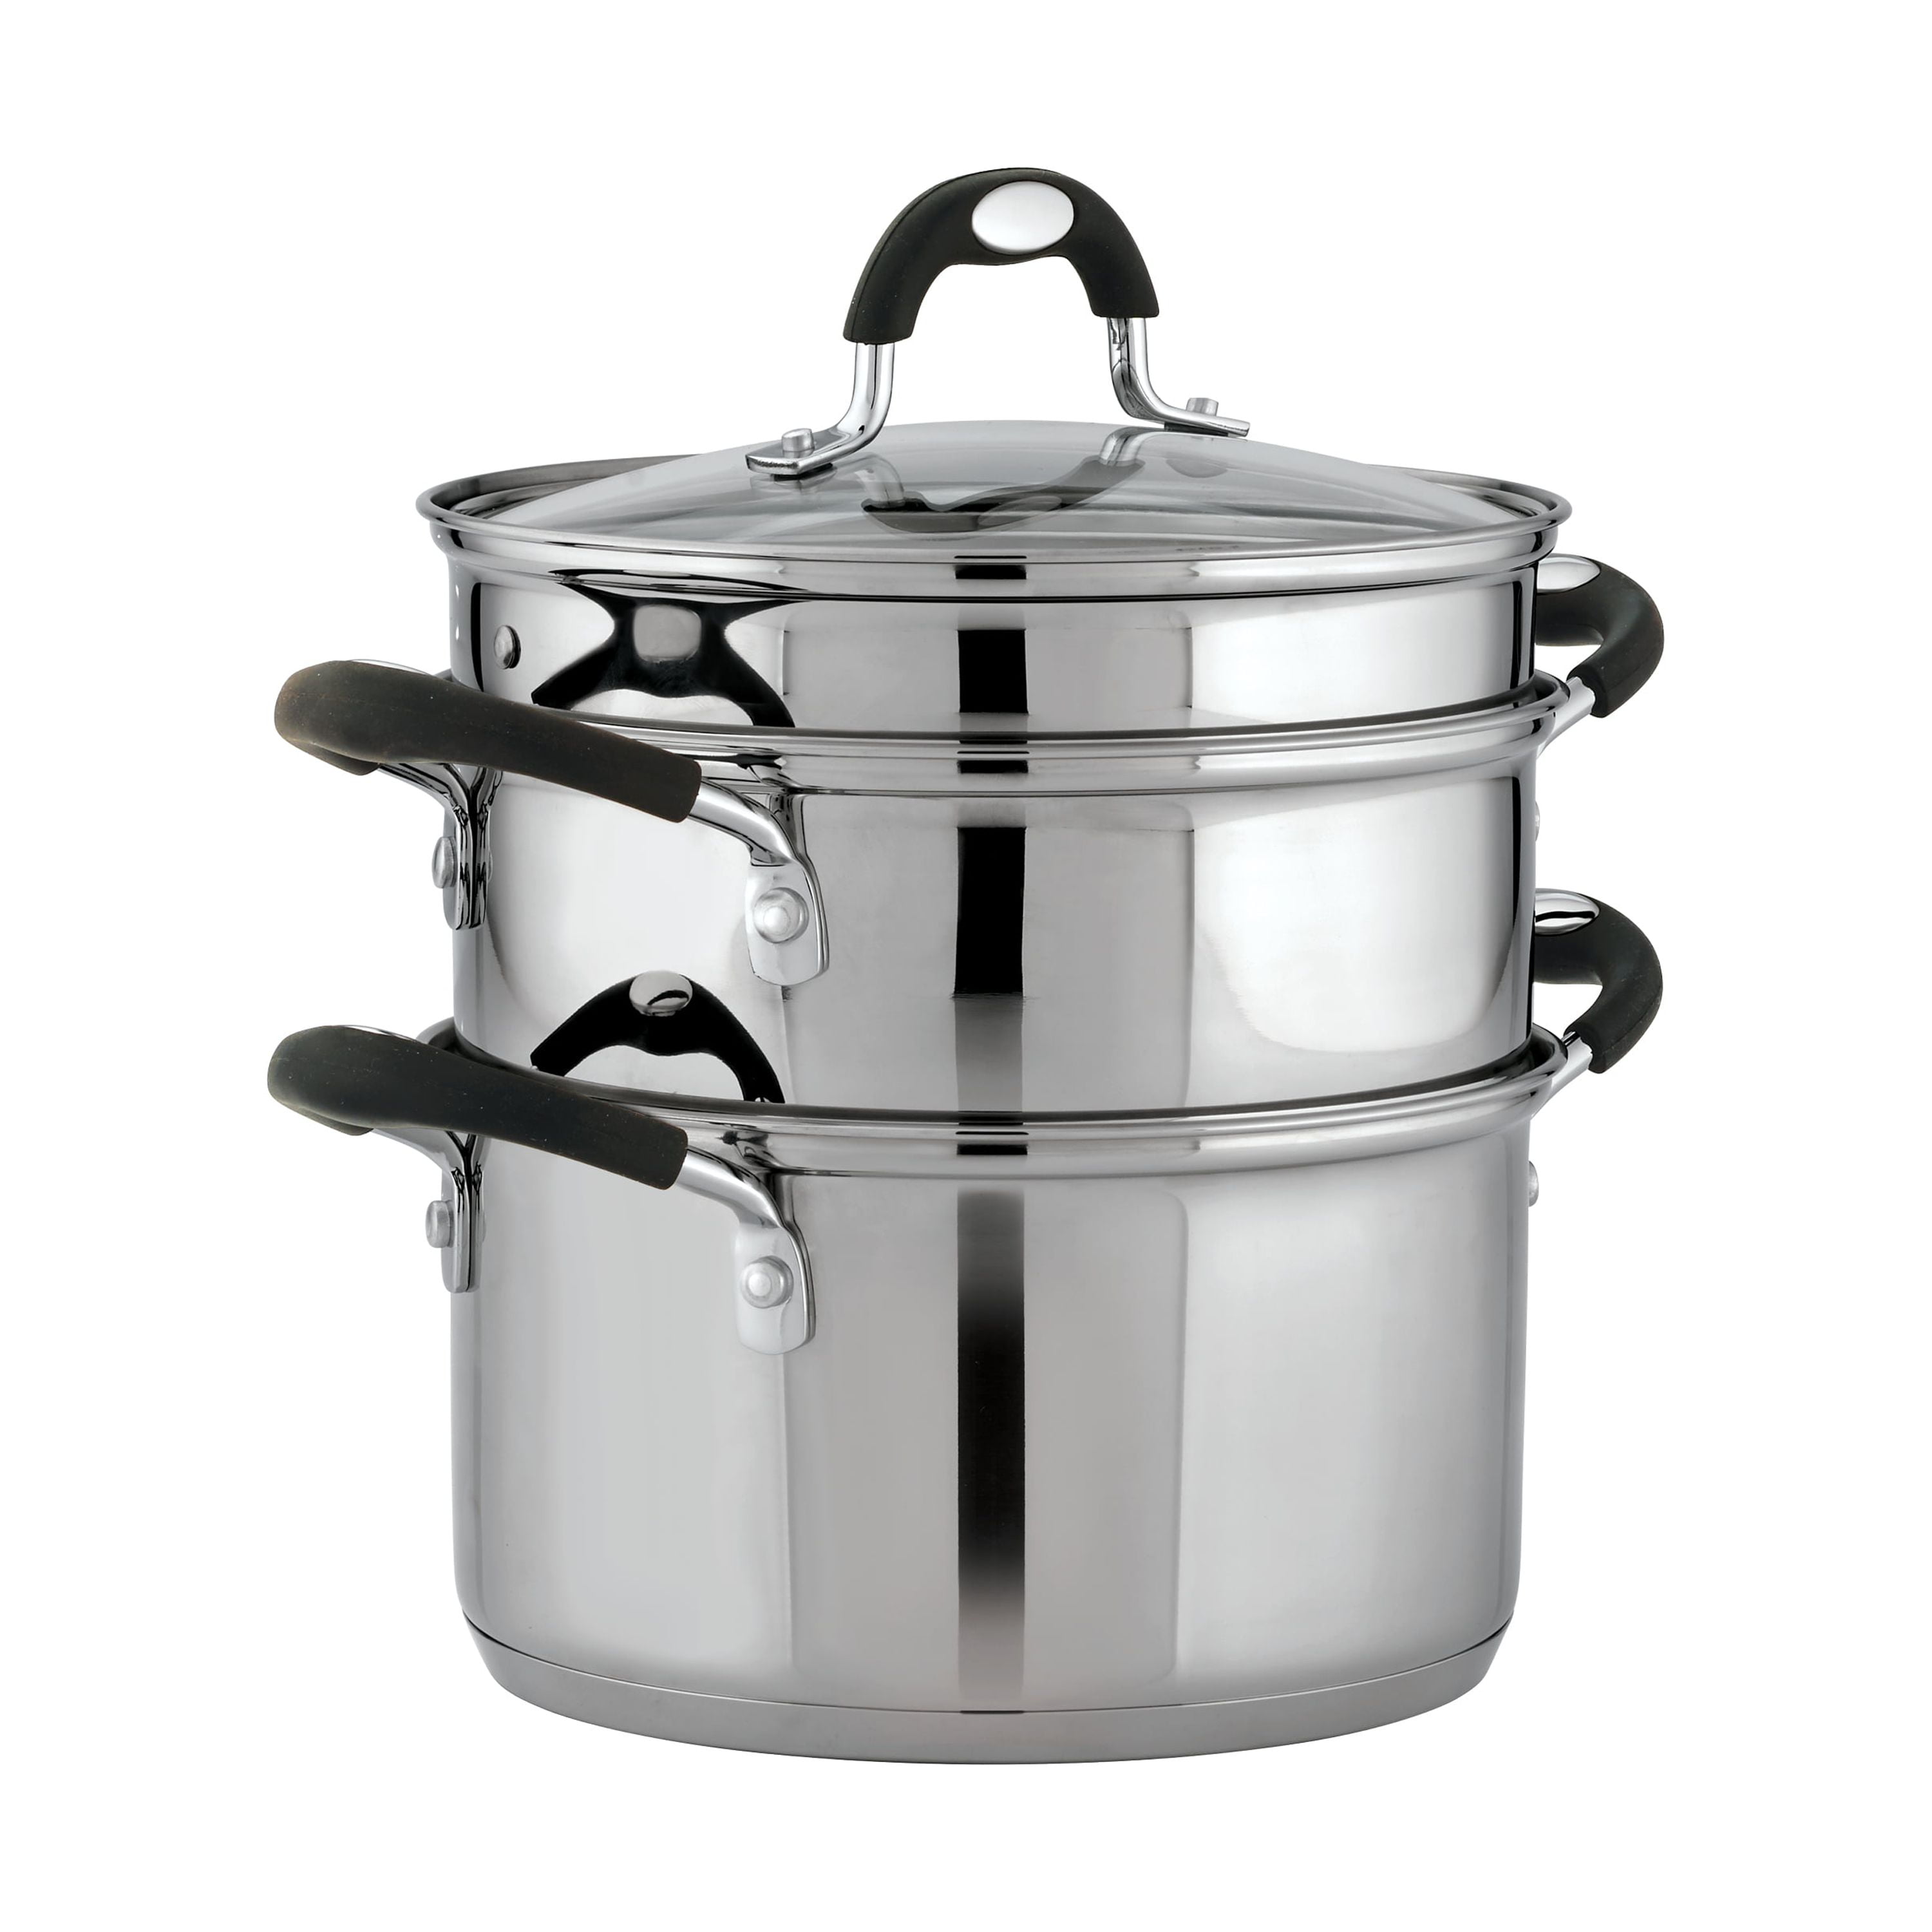 Stainless steel steamer recommended ·ASD three-layer double bottom steamer  with high capacity, no smell and easy storage